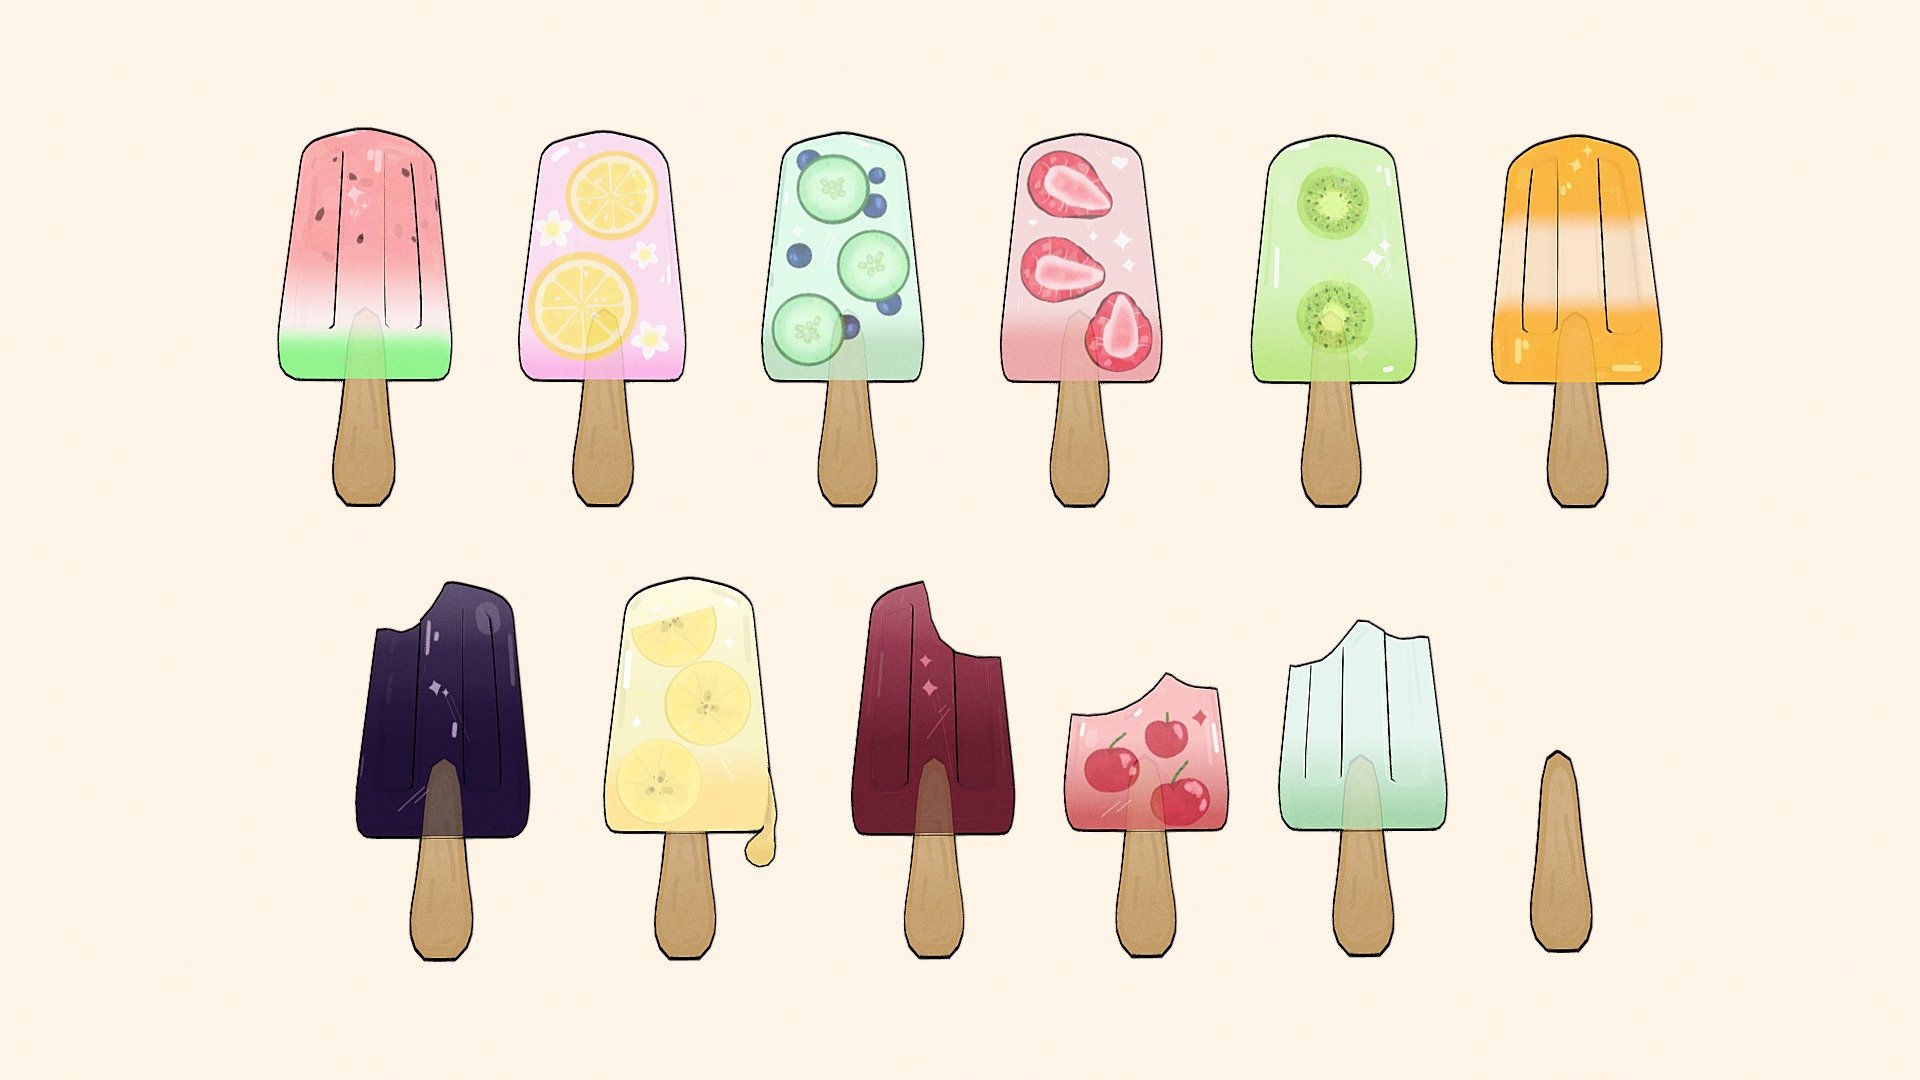 11 fruit ice creams/ice blocks in a cartoon style, including:
- watermelon
- lemon
- cucumber
- strawberry
- kiwi
- mango
- blackcurrent
- banana
- raspberry
- cherry
- lime
- example stick for reference

(◠‿◠✿) - Fruit Ice Cream Pack - 3D model by pea ꕤ (@3dchickpea) 3d model